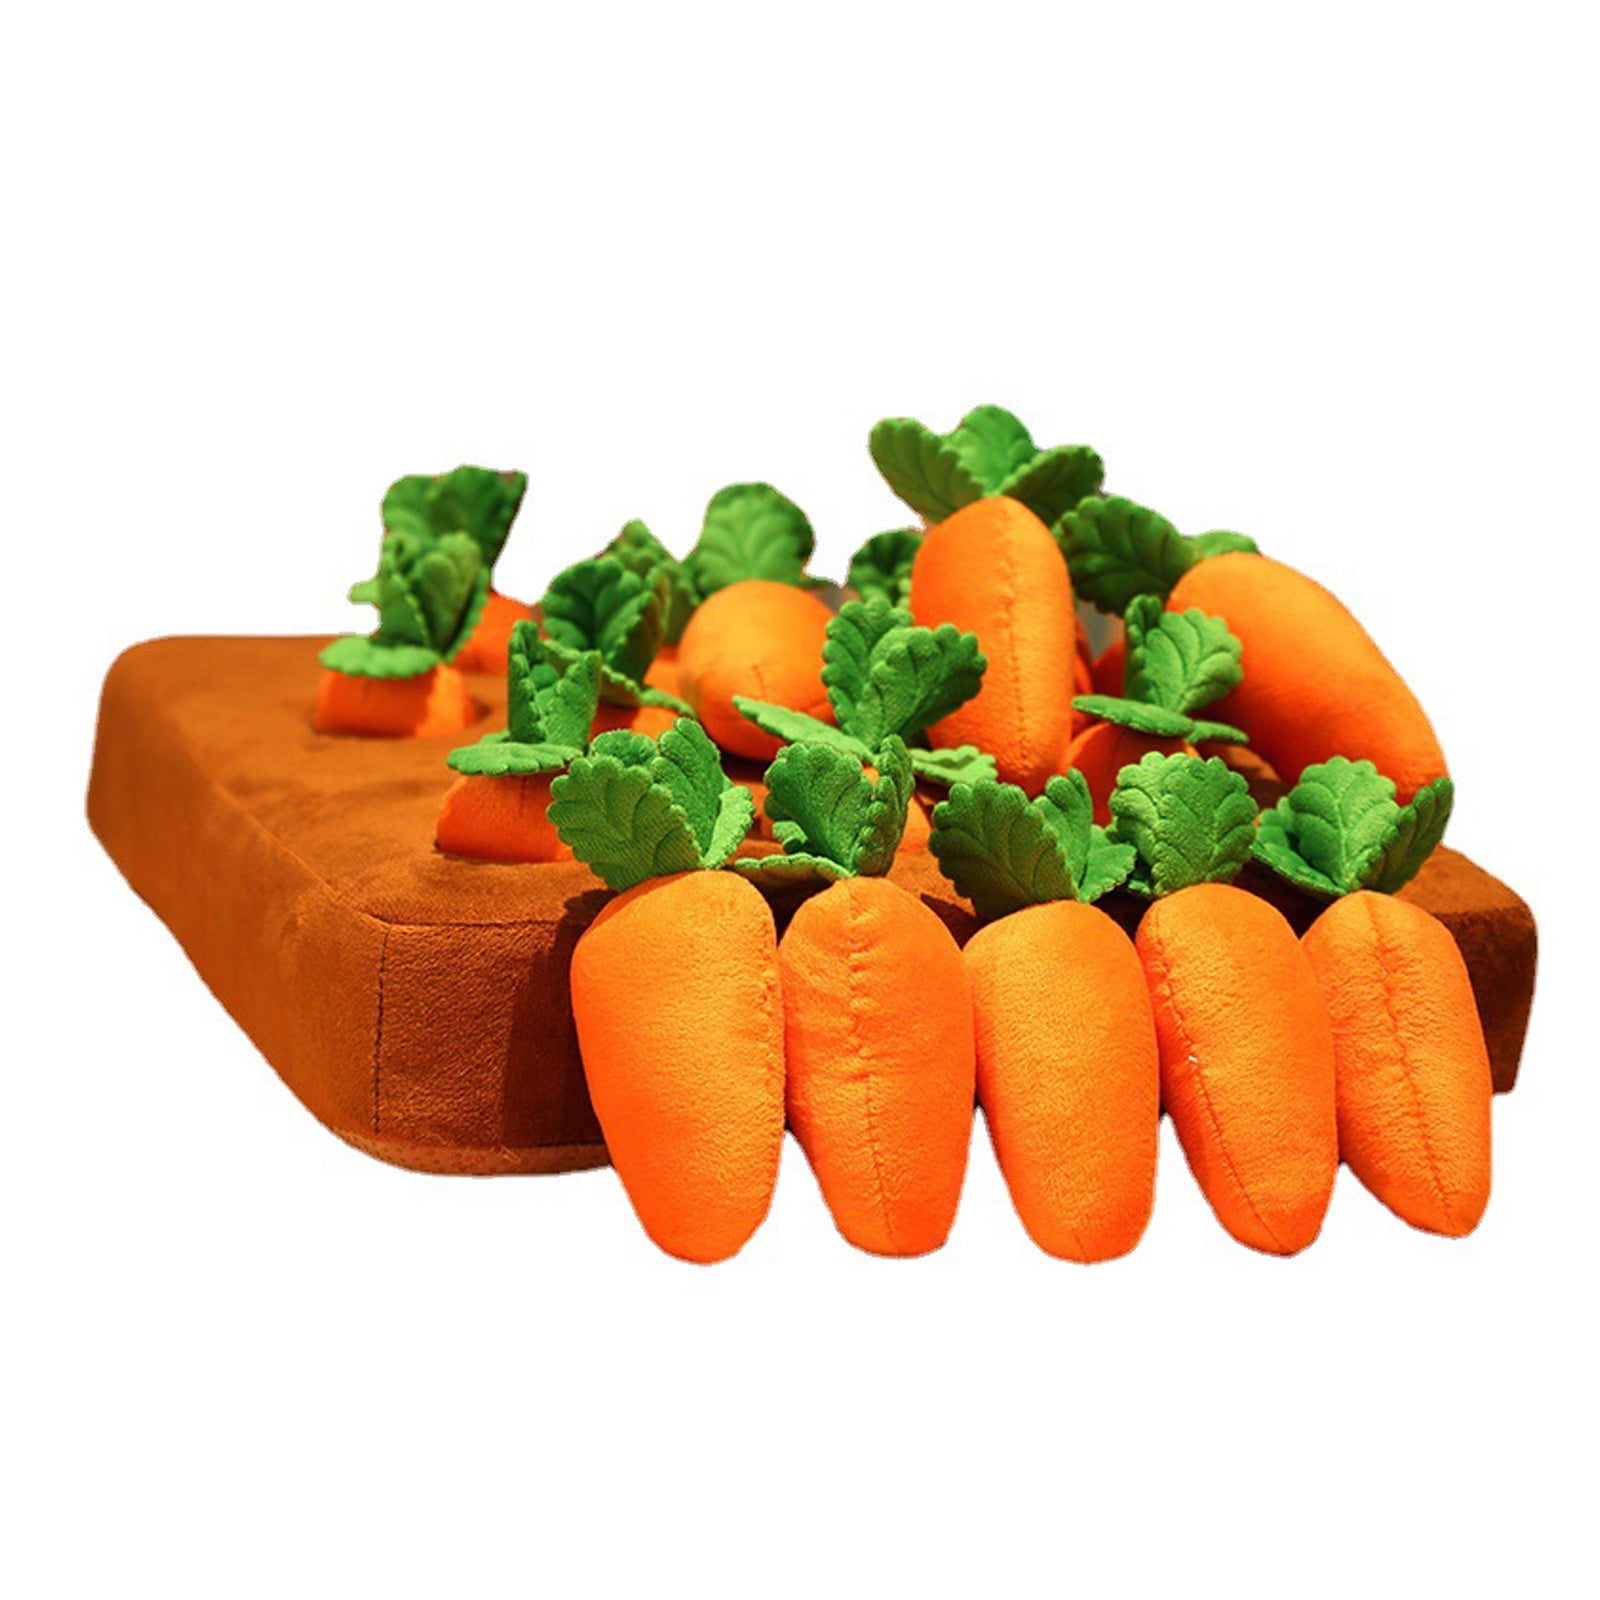 SOMOYA Dog Carrot Toy, Enrichment Dog Puzzle Toys, Hide and Seek Carrot Farm Dog Plush Chew Toys for Small Medium and Large Dogs Cats with 12 Carrots